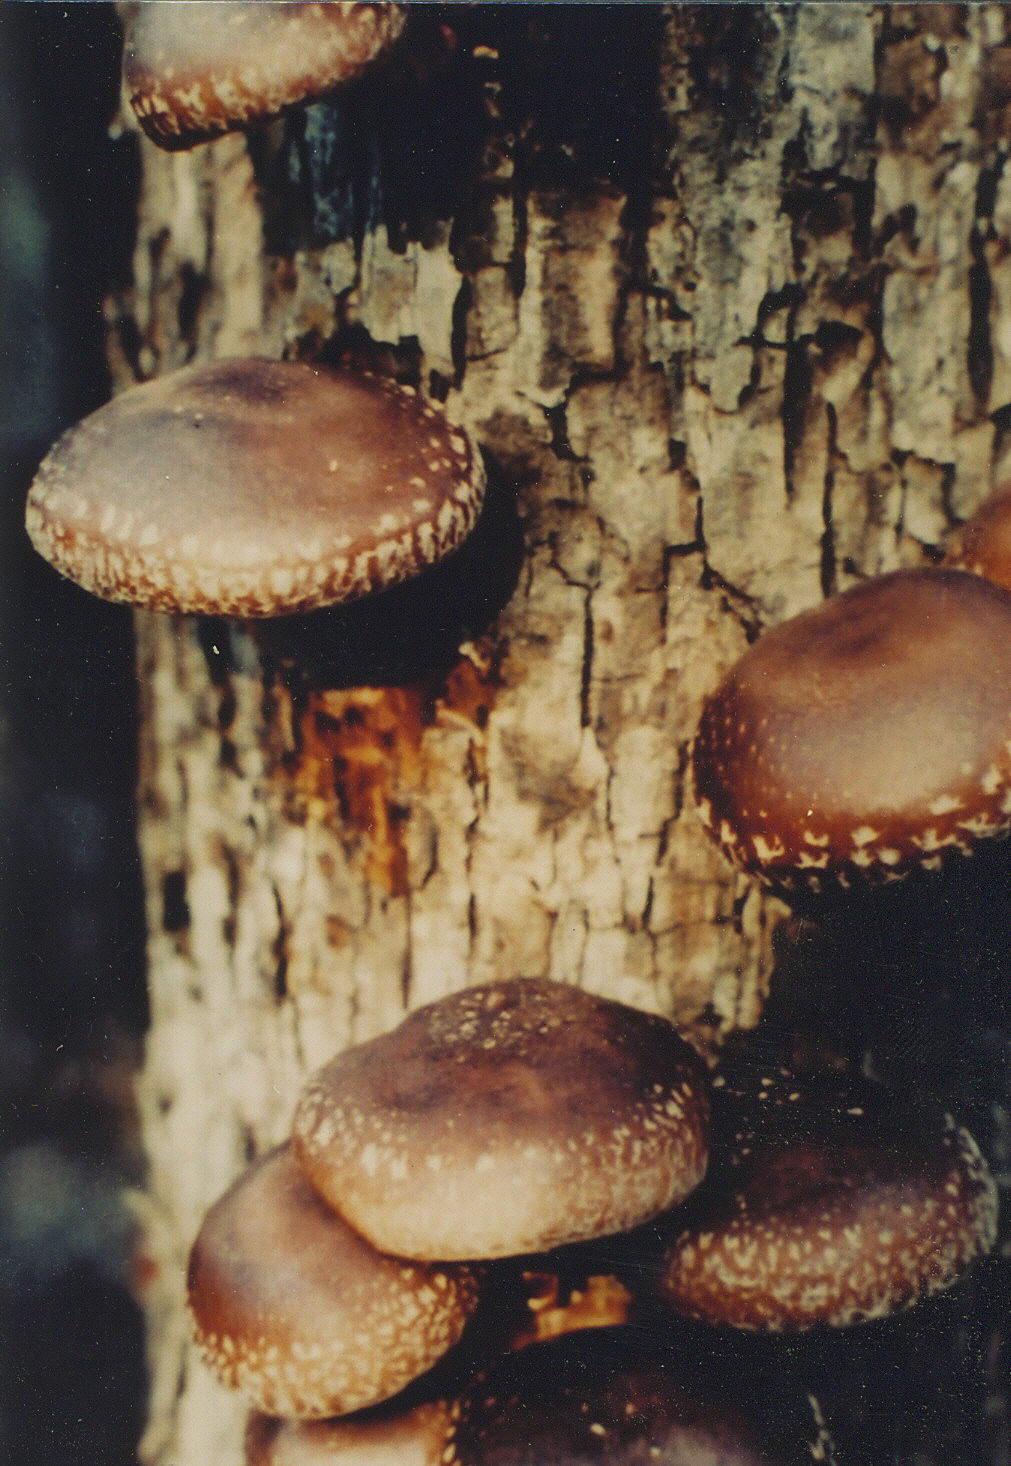 Shiitakes grown on logs-- Best flavor and highest nutritional and health benefits.